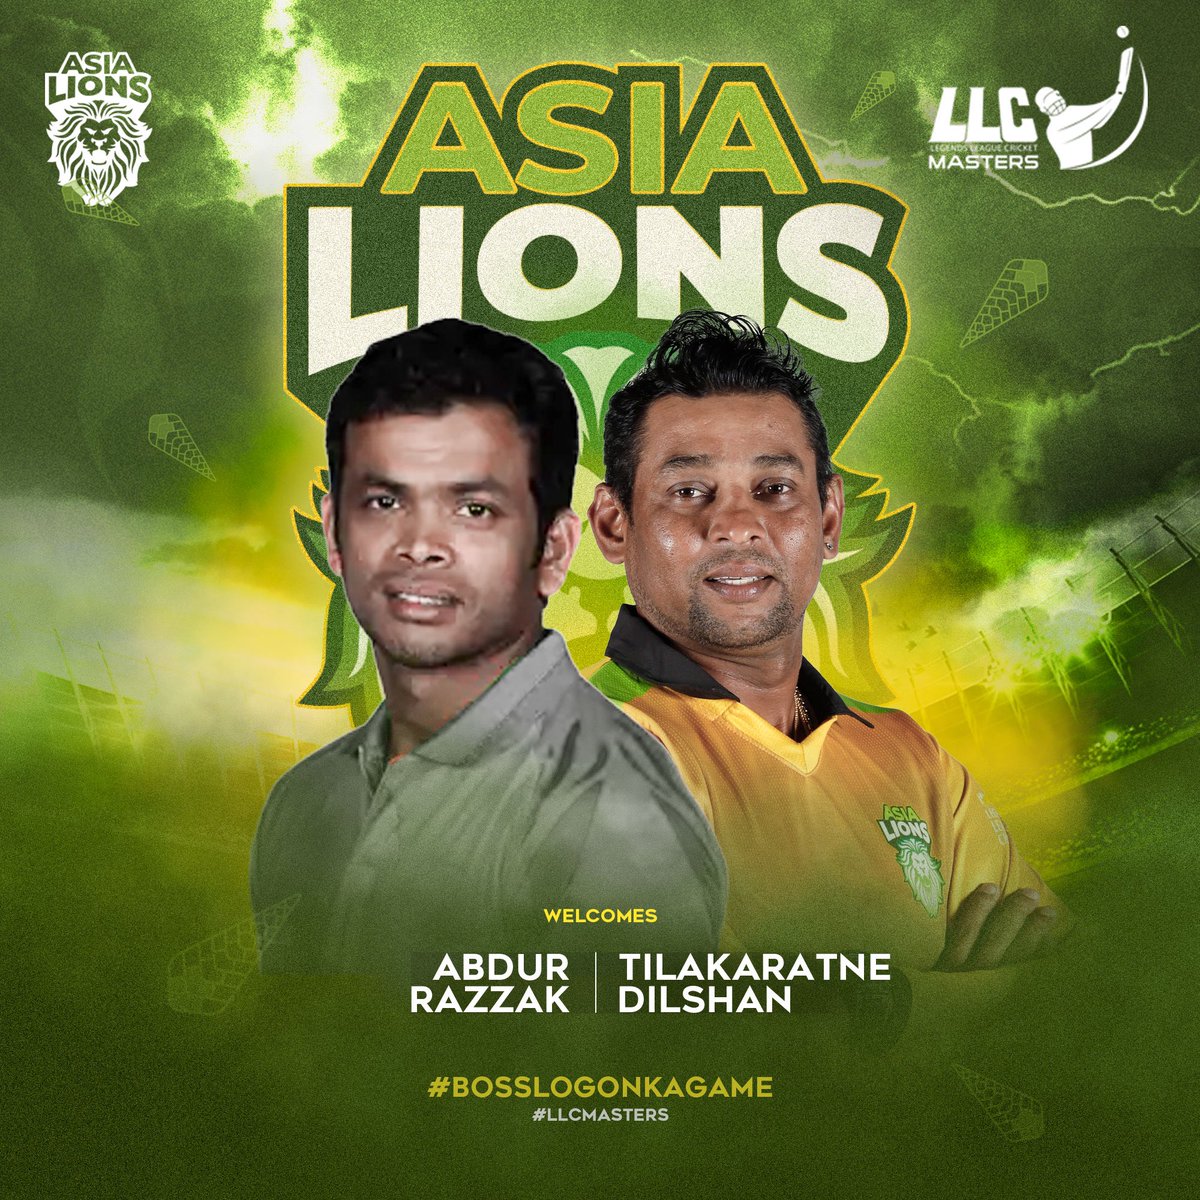 The Lions #AbdurRazzak #Dilshan are all set for the new hunting season of #LLCMasters. 

#LegendsLeagueCricket @llct20 #LLCT20 #BossLogonKaGame